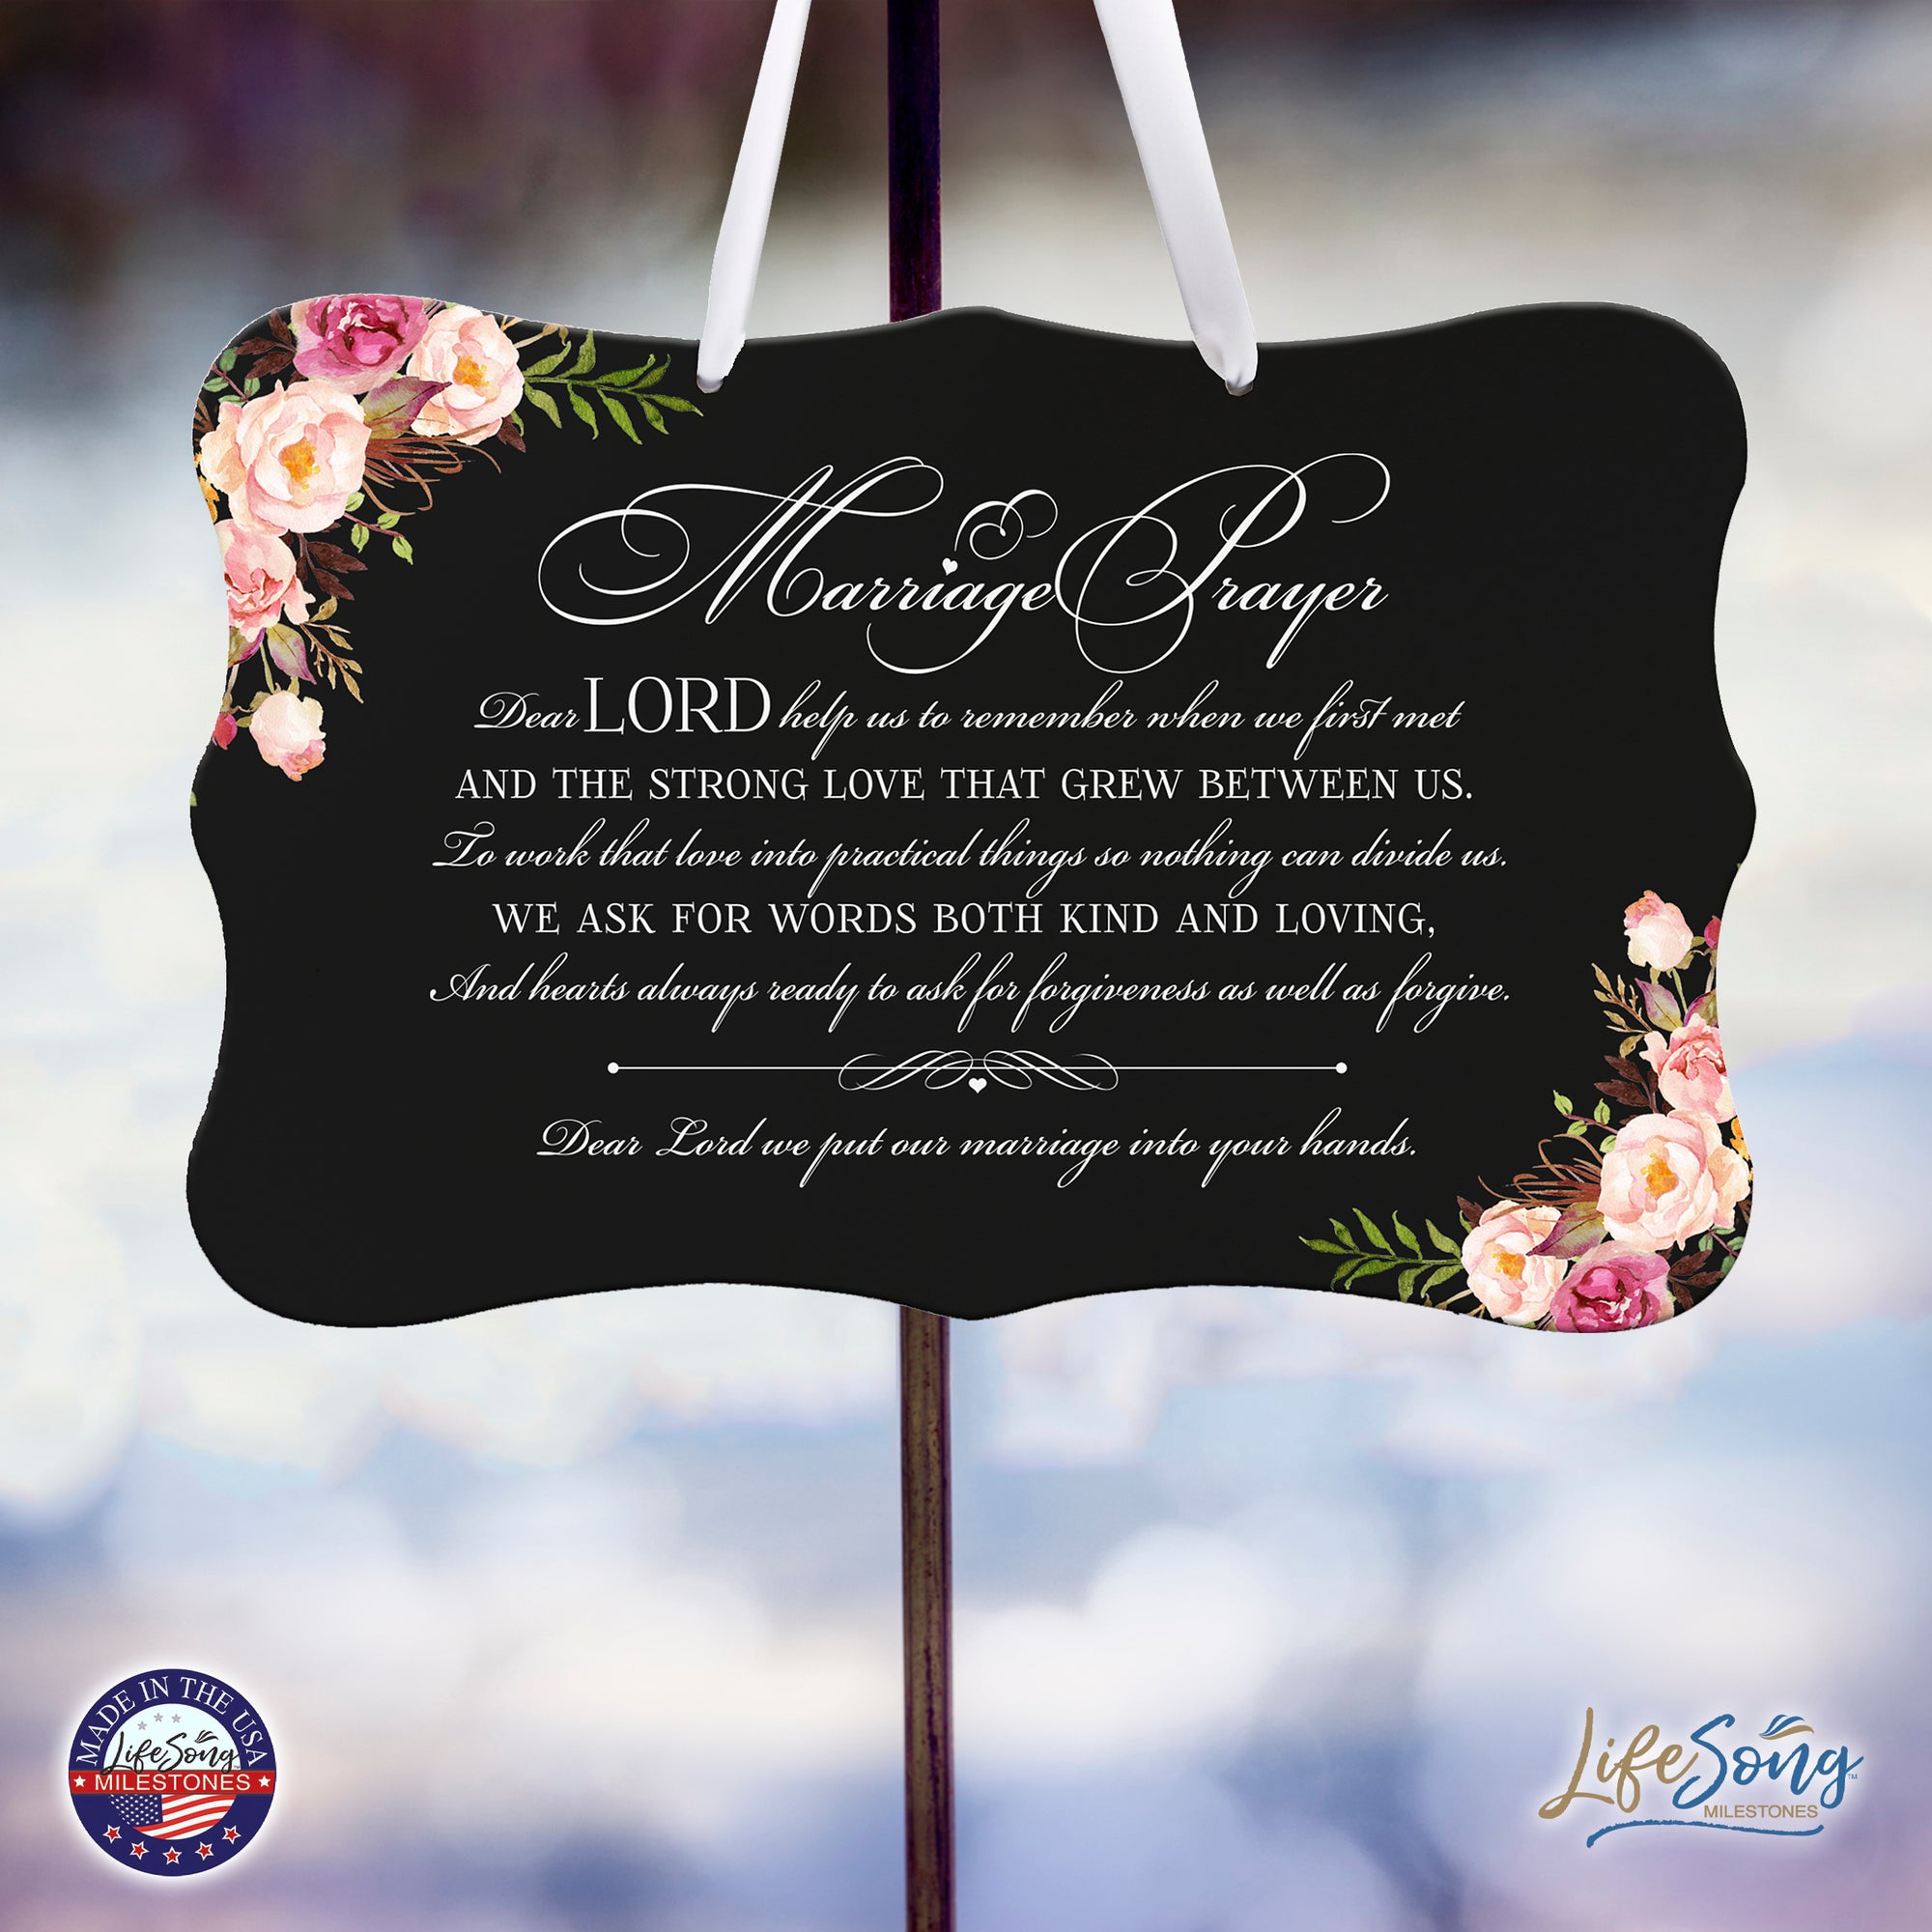 Wedding Wall Hanging Signs For Ceremony And Reception For Couples - Marriage Prayer